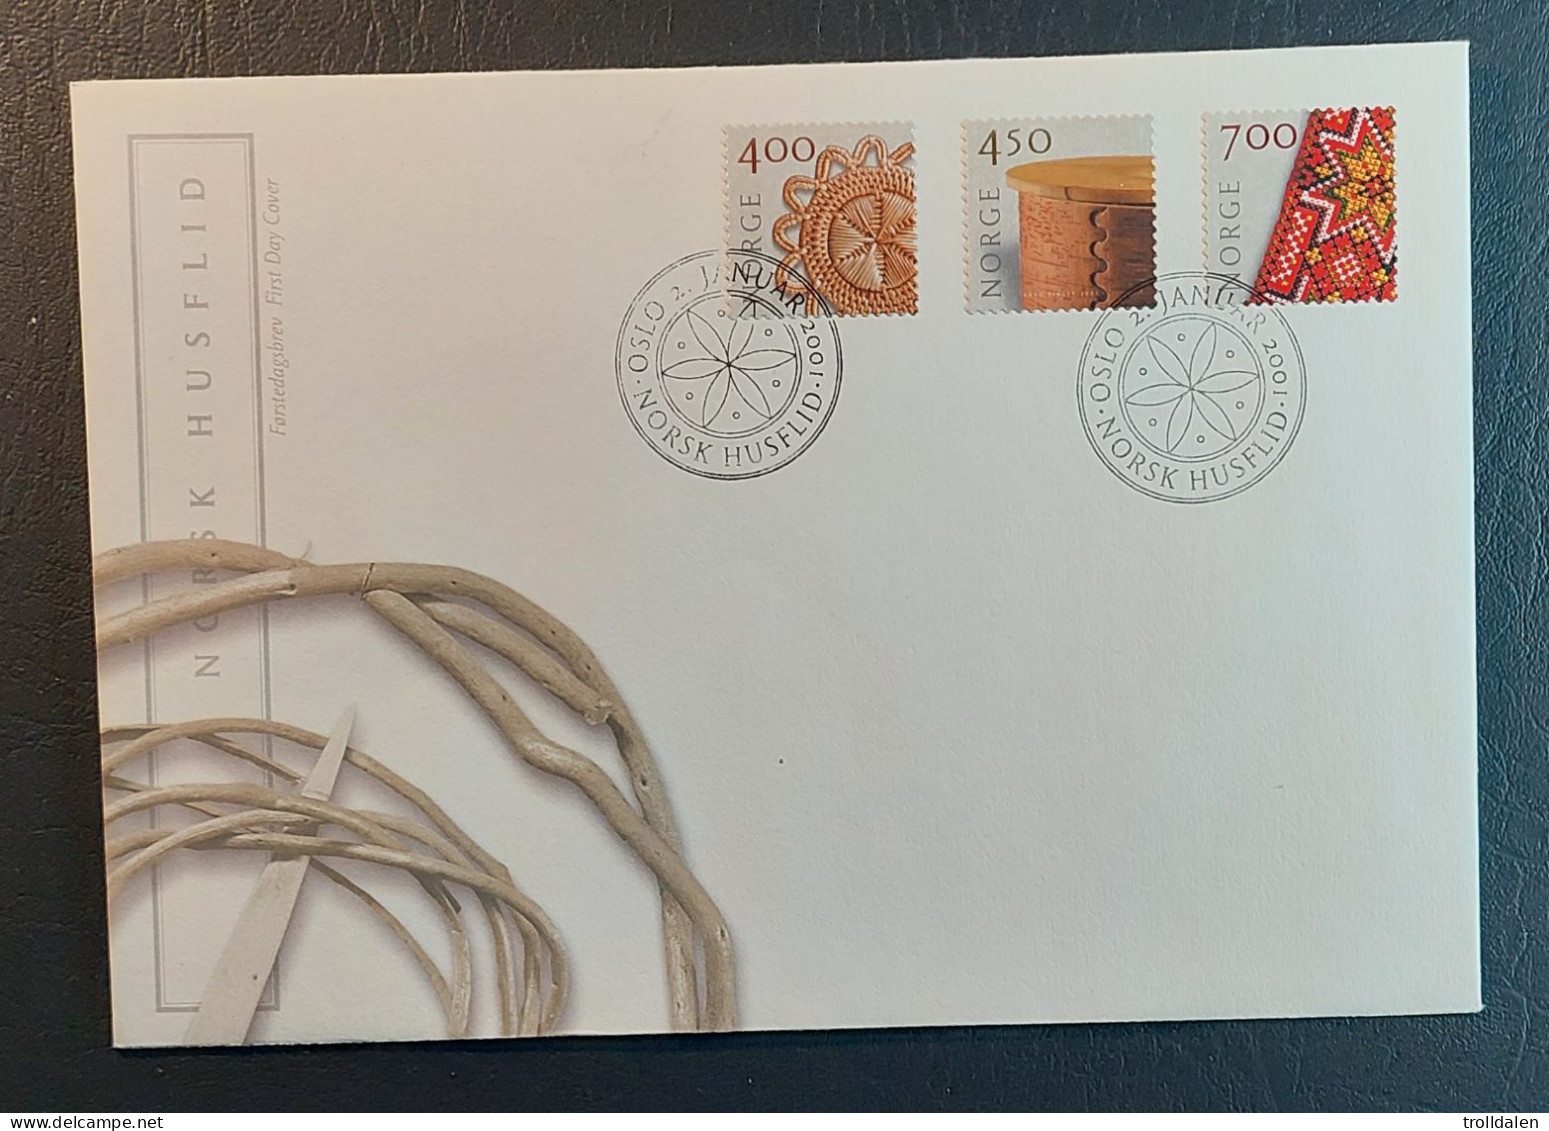 Norway FDC 2001 - FDC